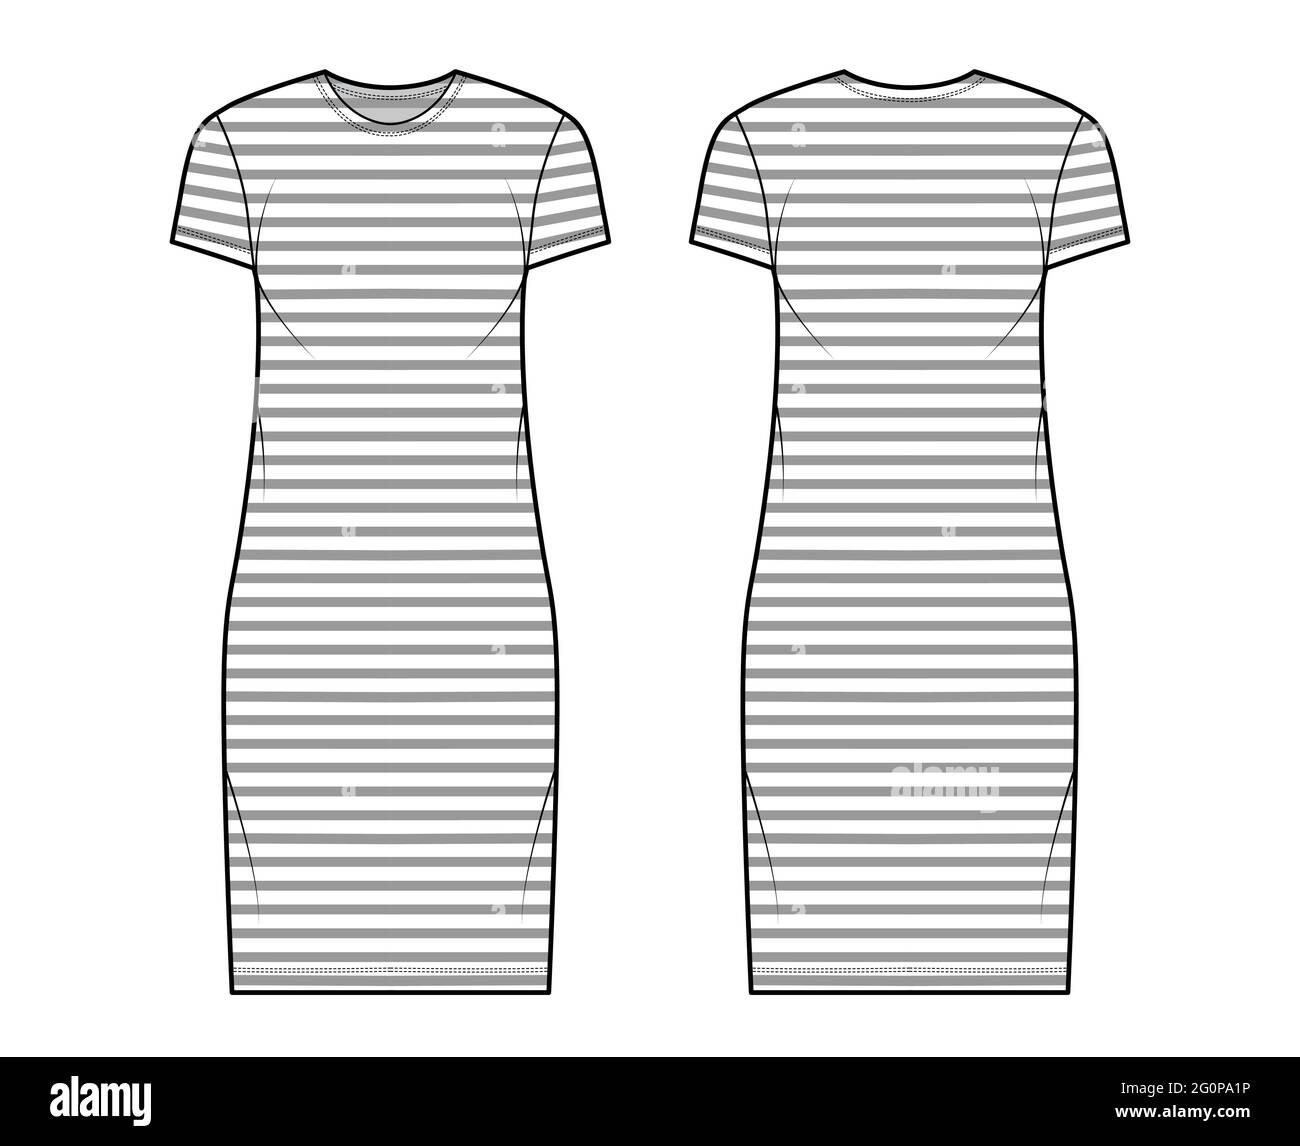 Dress sailor technical fashion illustration with stripes, short sleeves ...